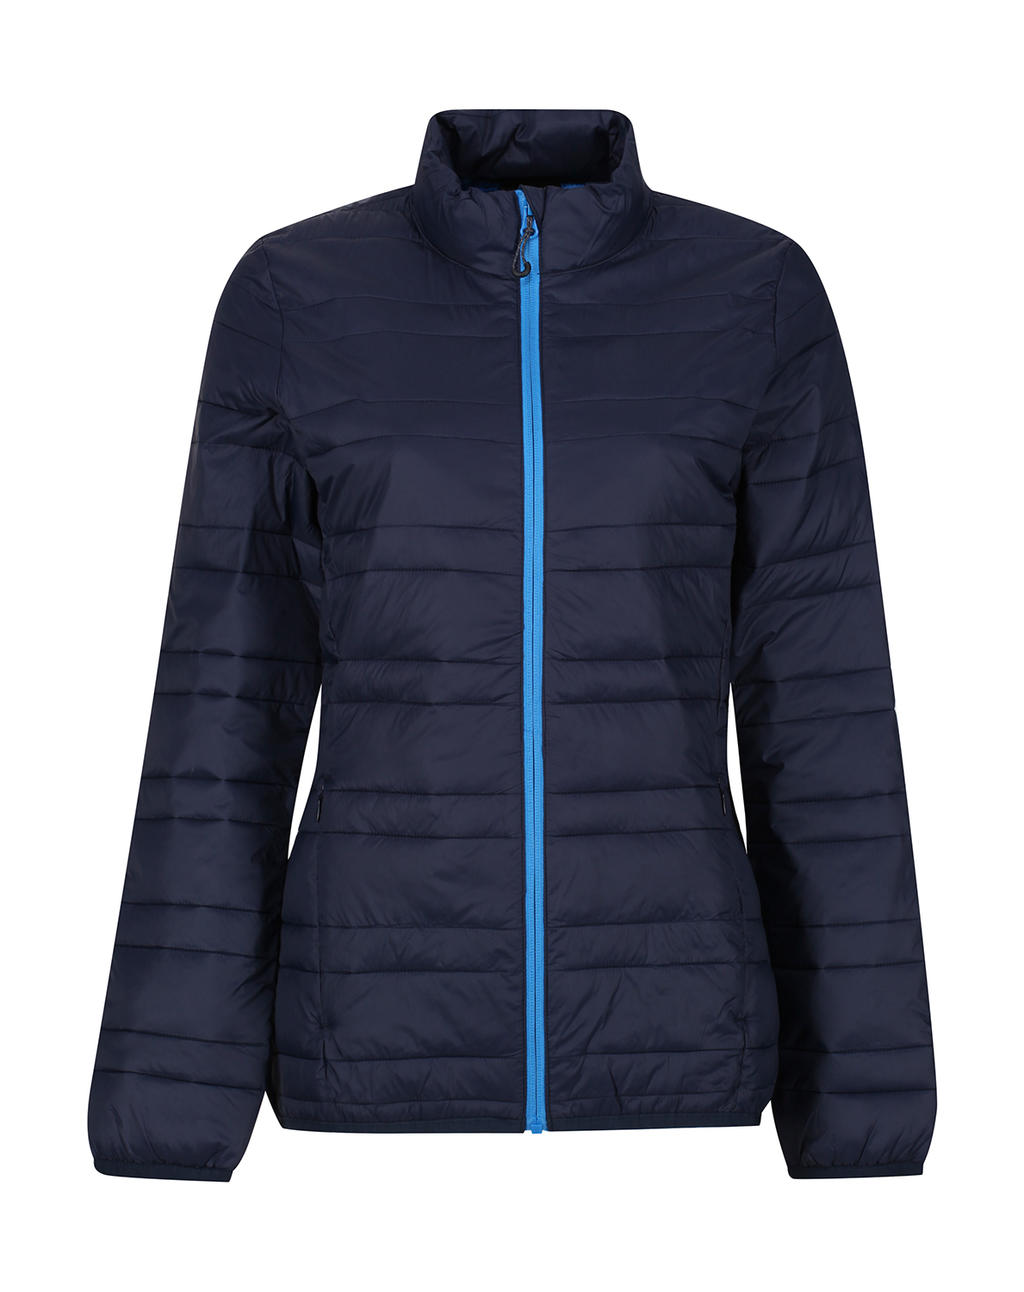  Womens Firedown Down-Touch Jacket in Farbe Navy/French Blue